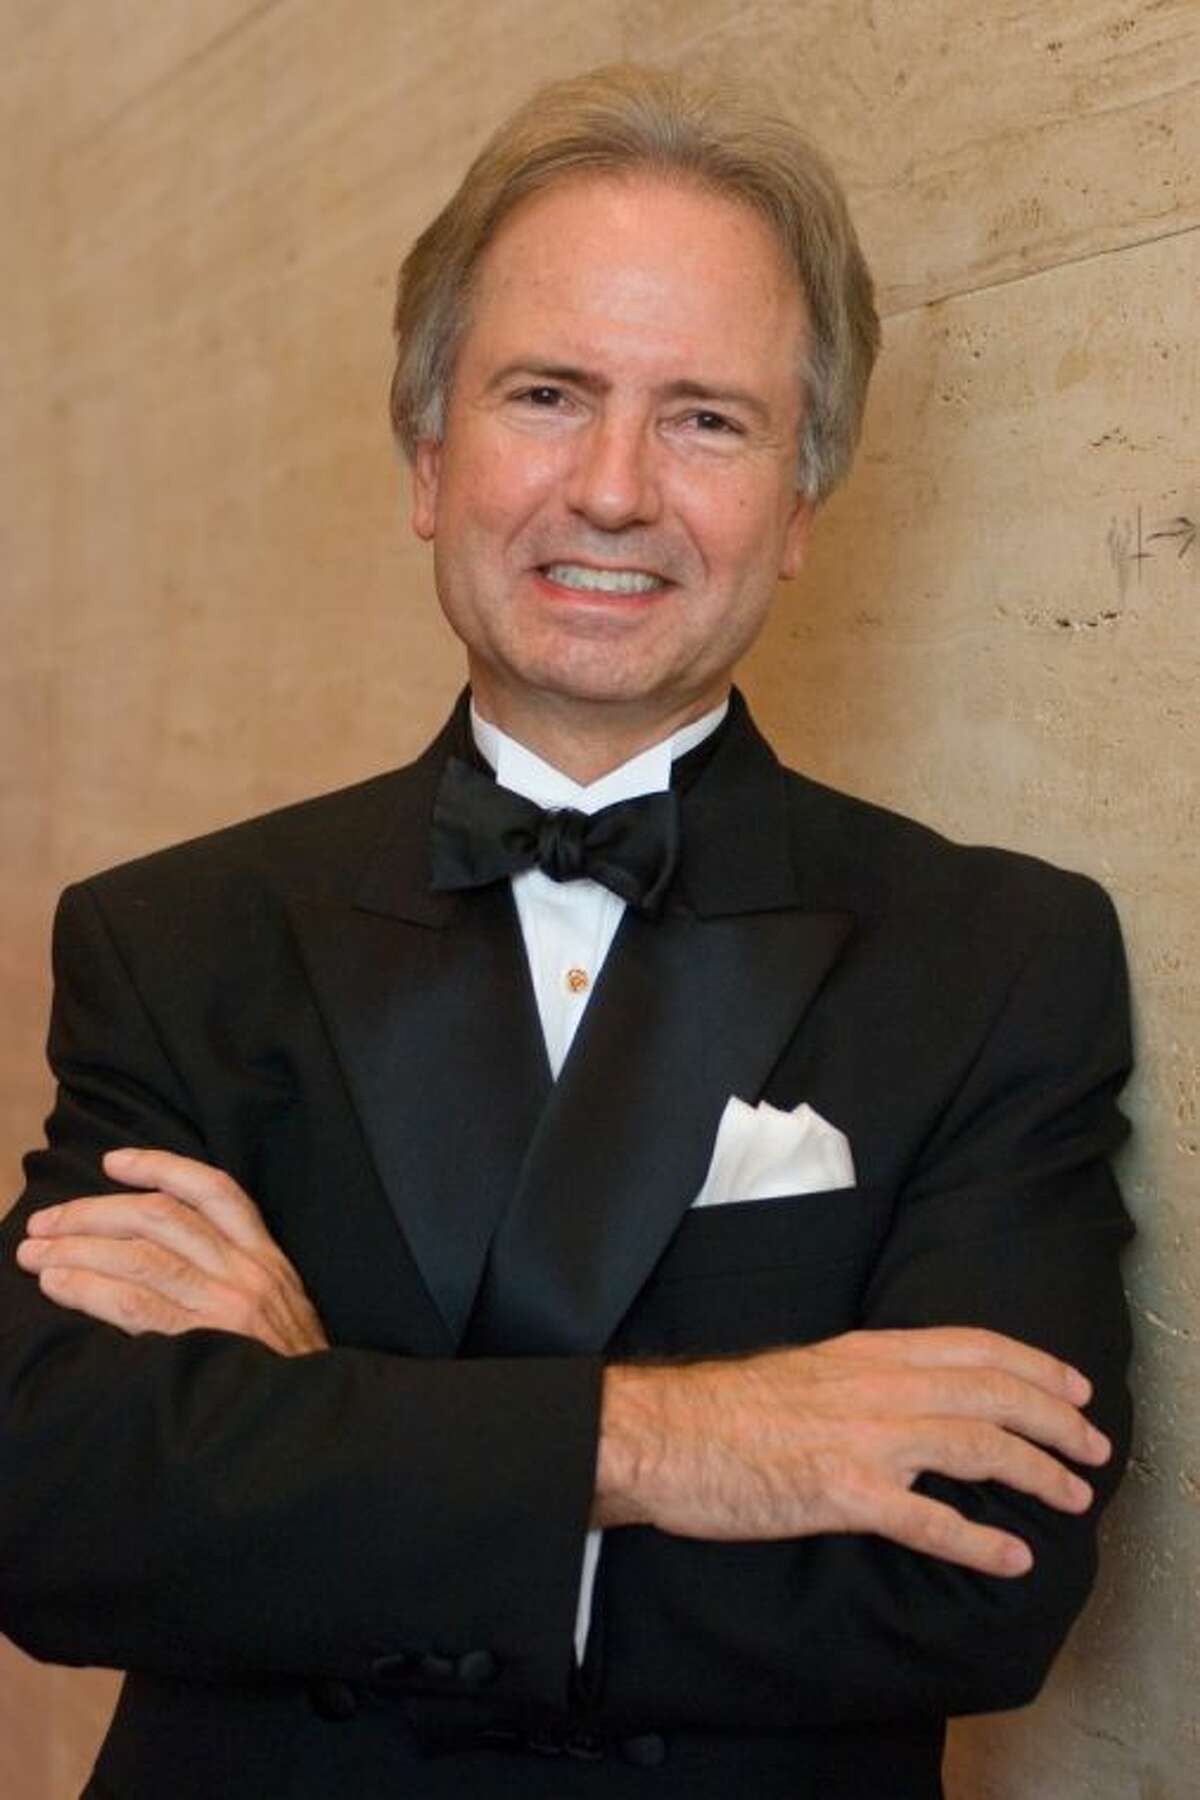 Dr. Charles Hausmann announced his retirement after 28 years at the helm of the Houston Symphony Chorus. Hausmann says he will pursue other professional opportunities.